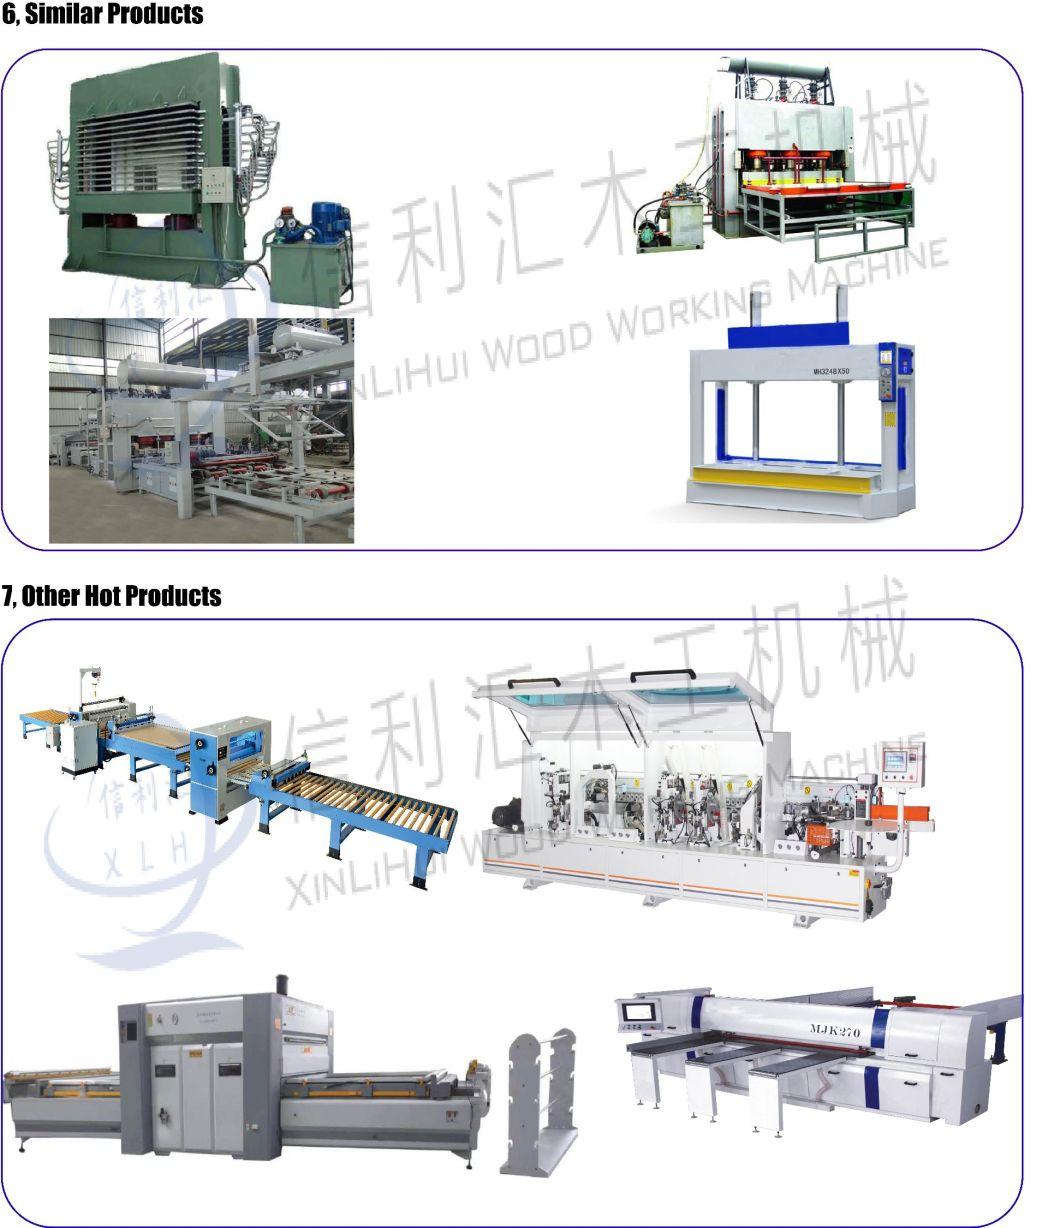 600t/800t Film Faced Plywood Hot Press Wood Based Panel Manufacturing Hot Press Machine with Automatic Feeding in and out